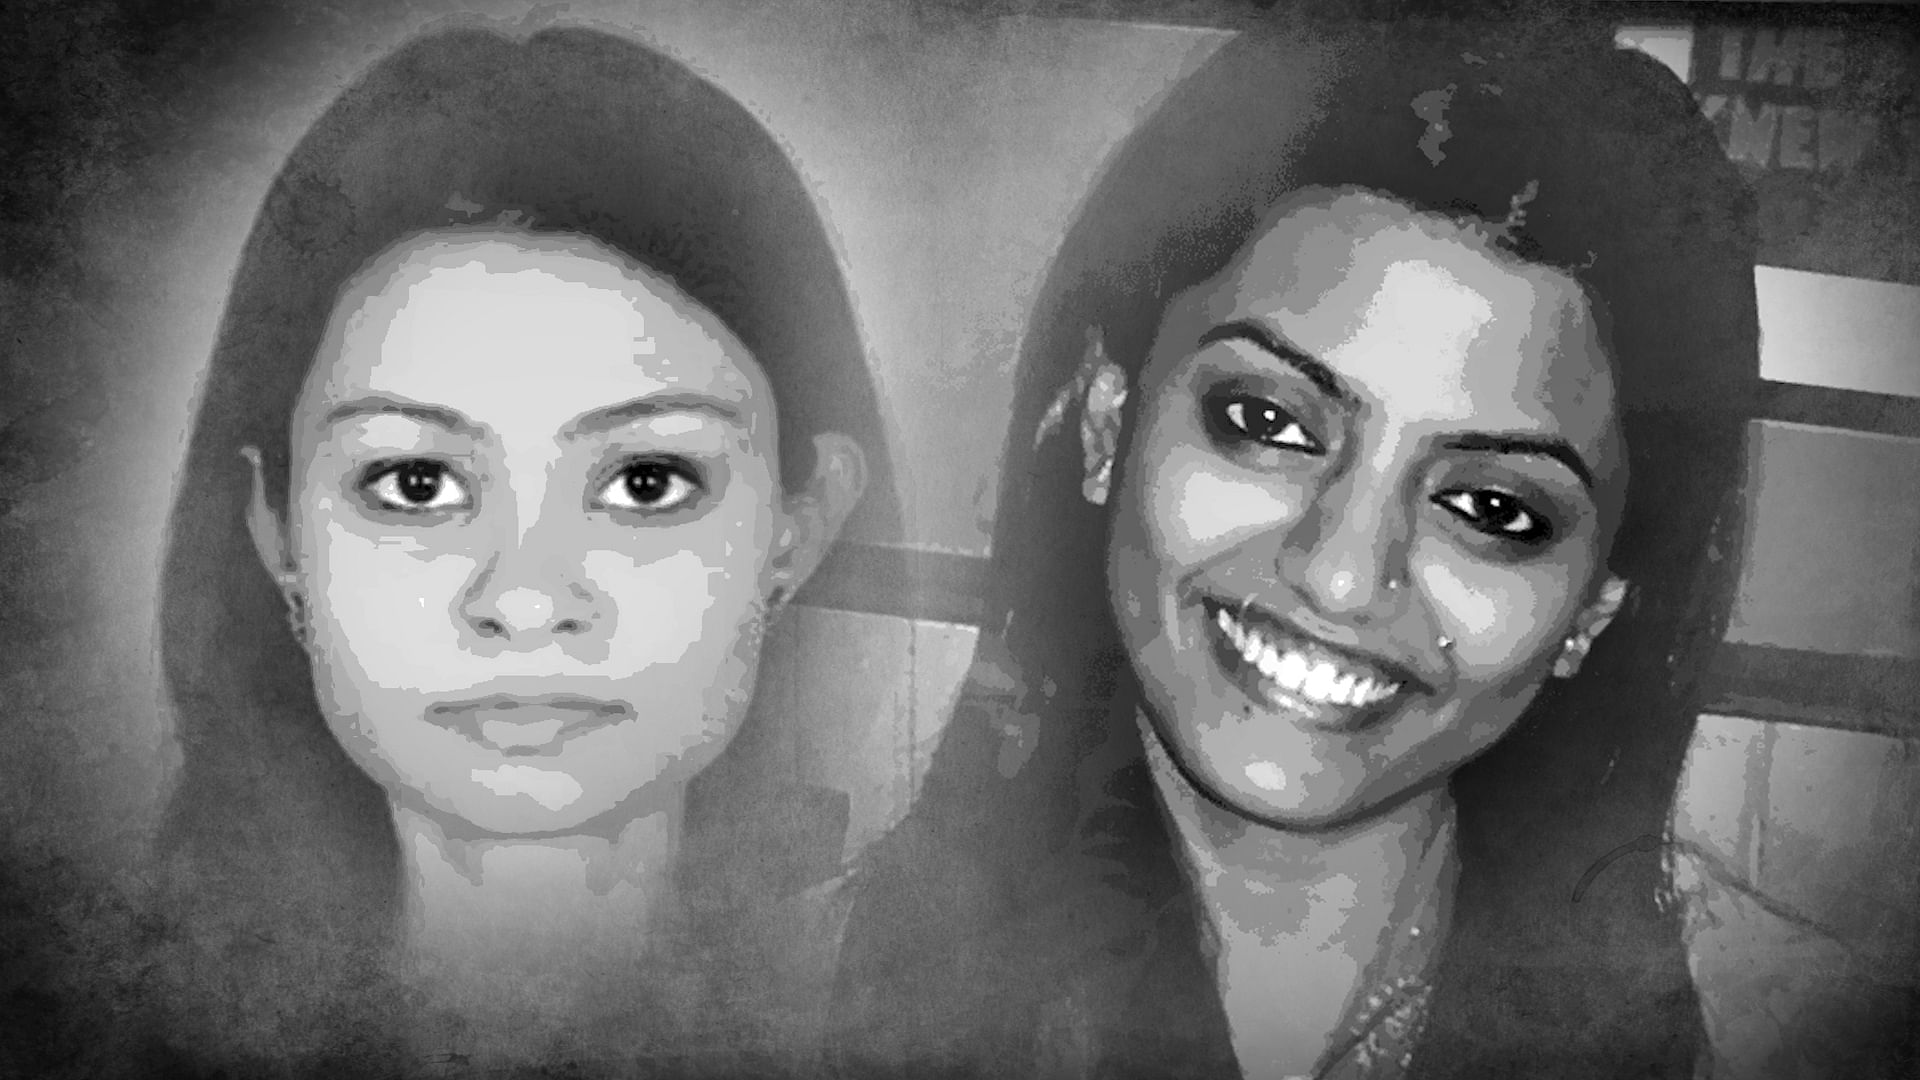 Jigisha Ghosh (left) was abducted and murdered in 2009 while Soumya Vishwanathan (right) was killed in 2008.